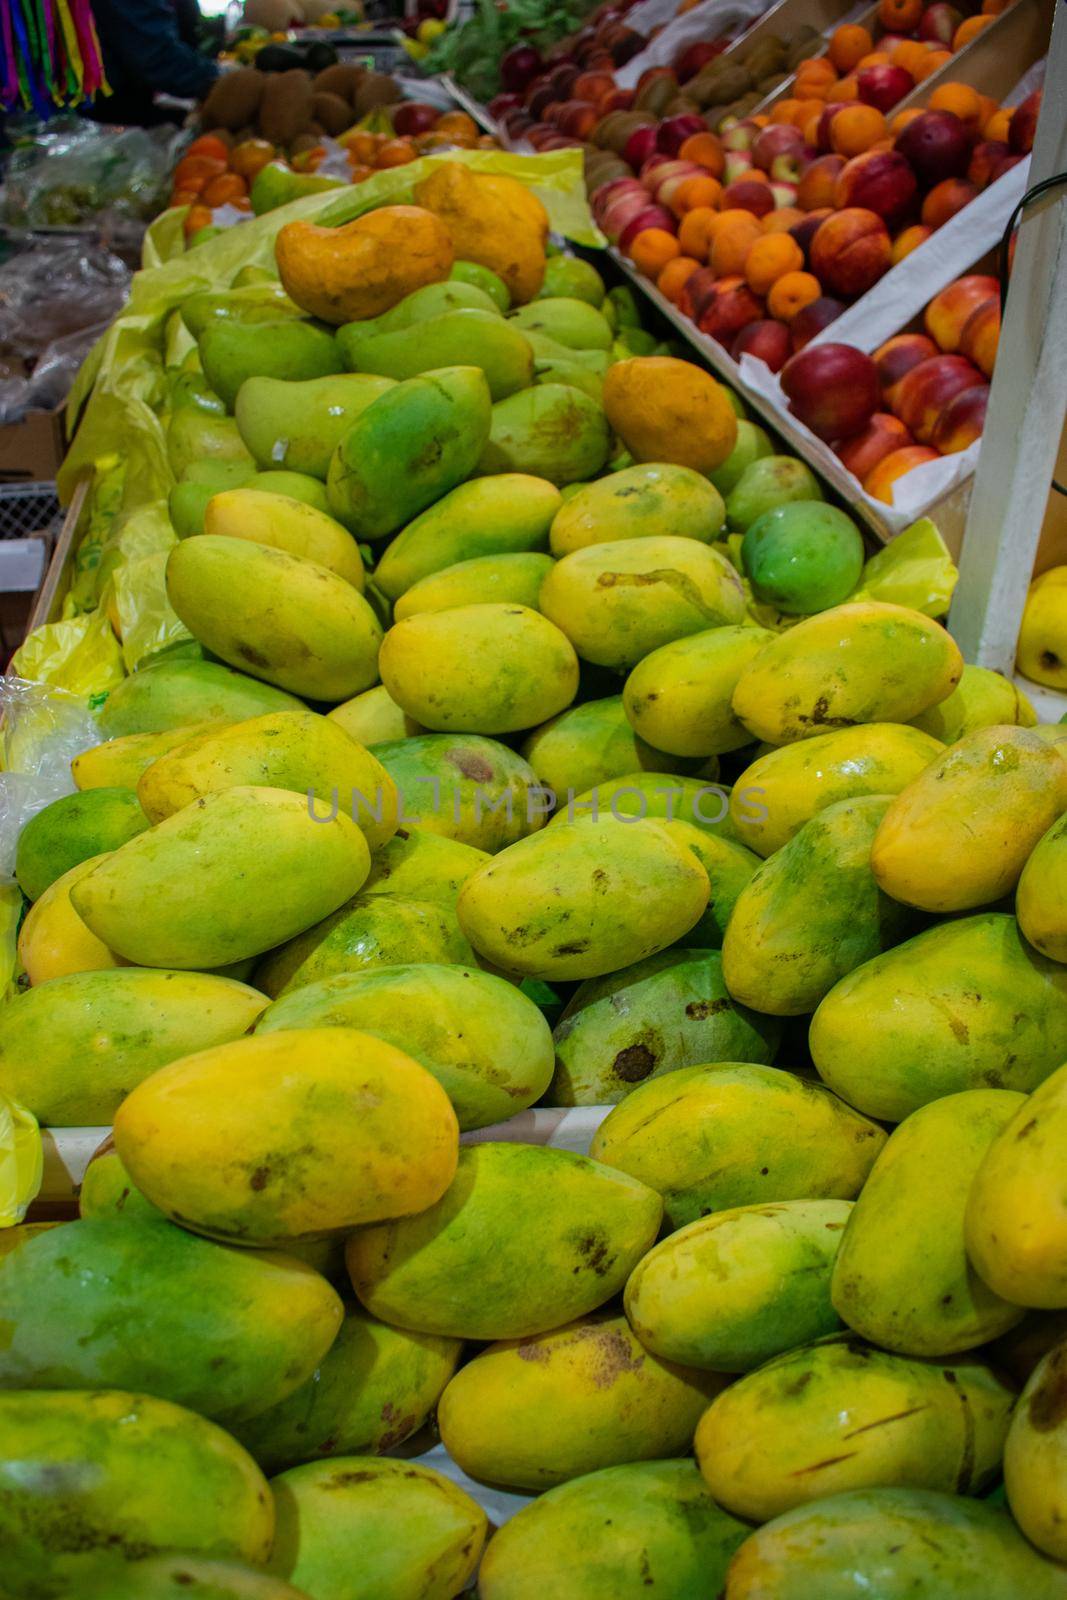 Colorful and unripe mangoes, peaches, and more fruit for sale. Variety of fresh fruit displayed in stand inside Mexican market. Healthy eating